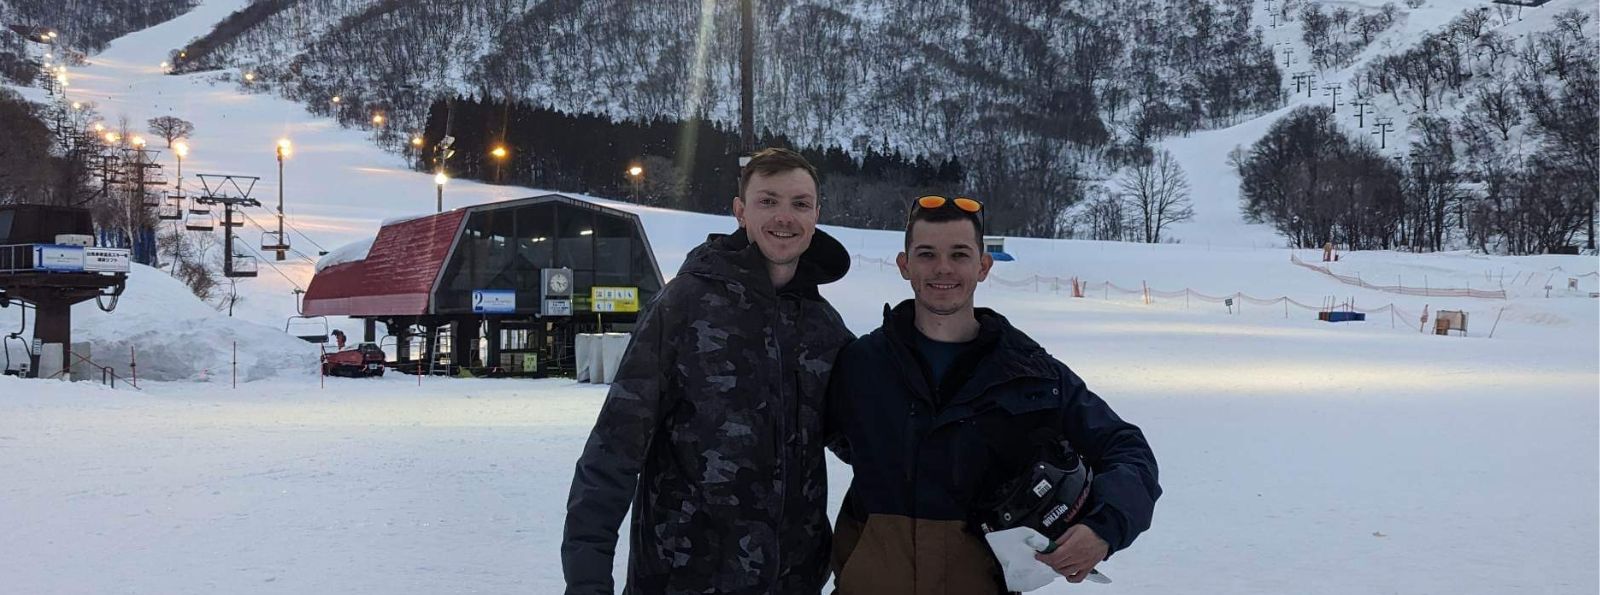 Stefan and his brother on a snowboarding trip in Japan. (Source: Supplied) 